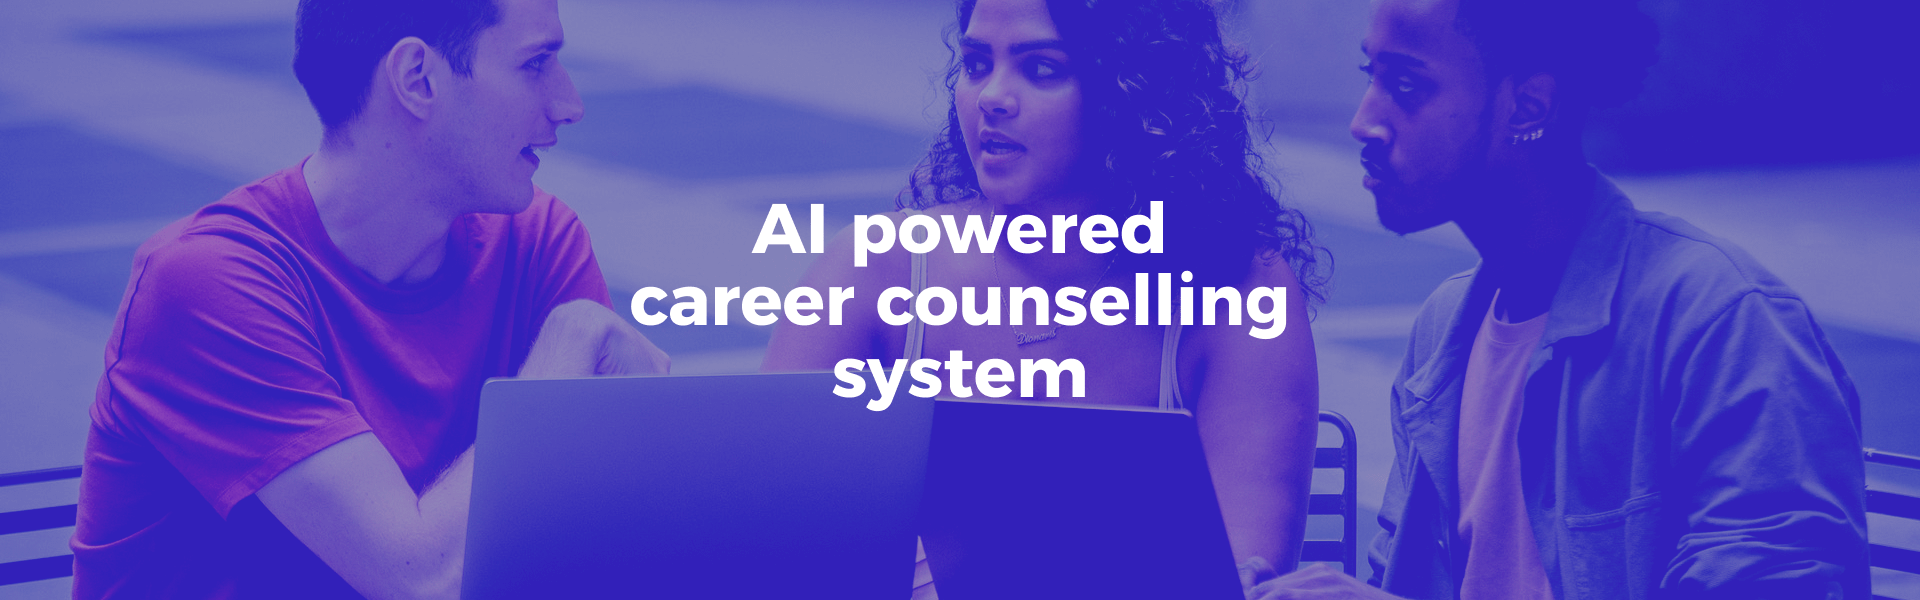 AI powered career counselling system